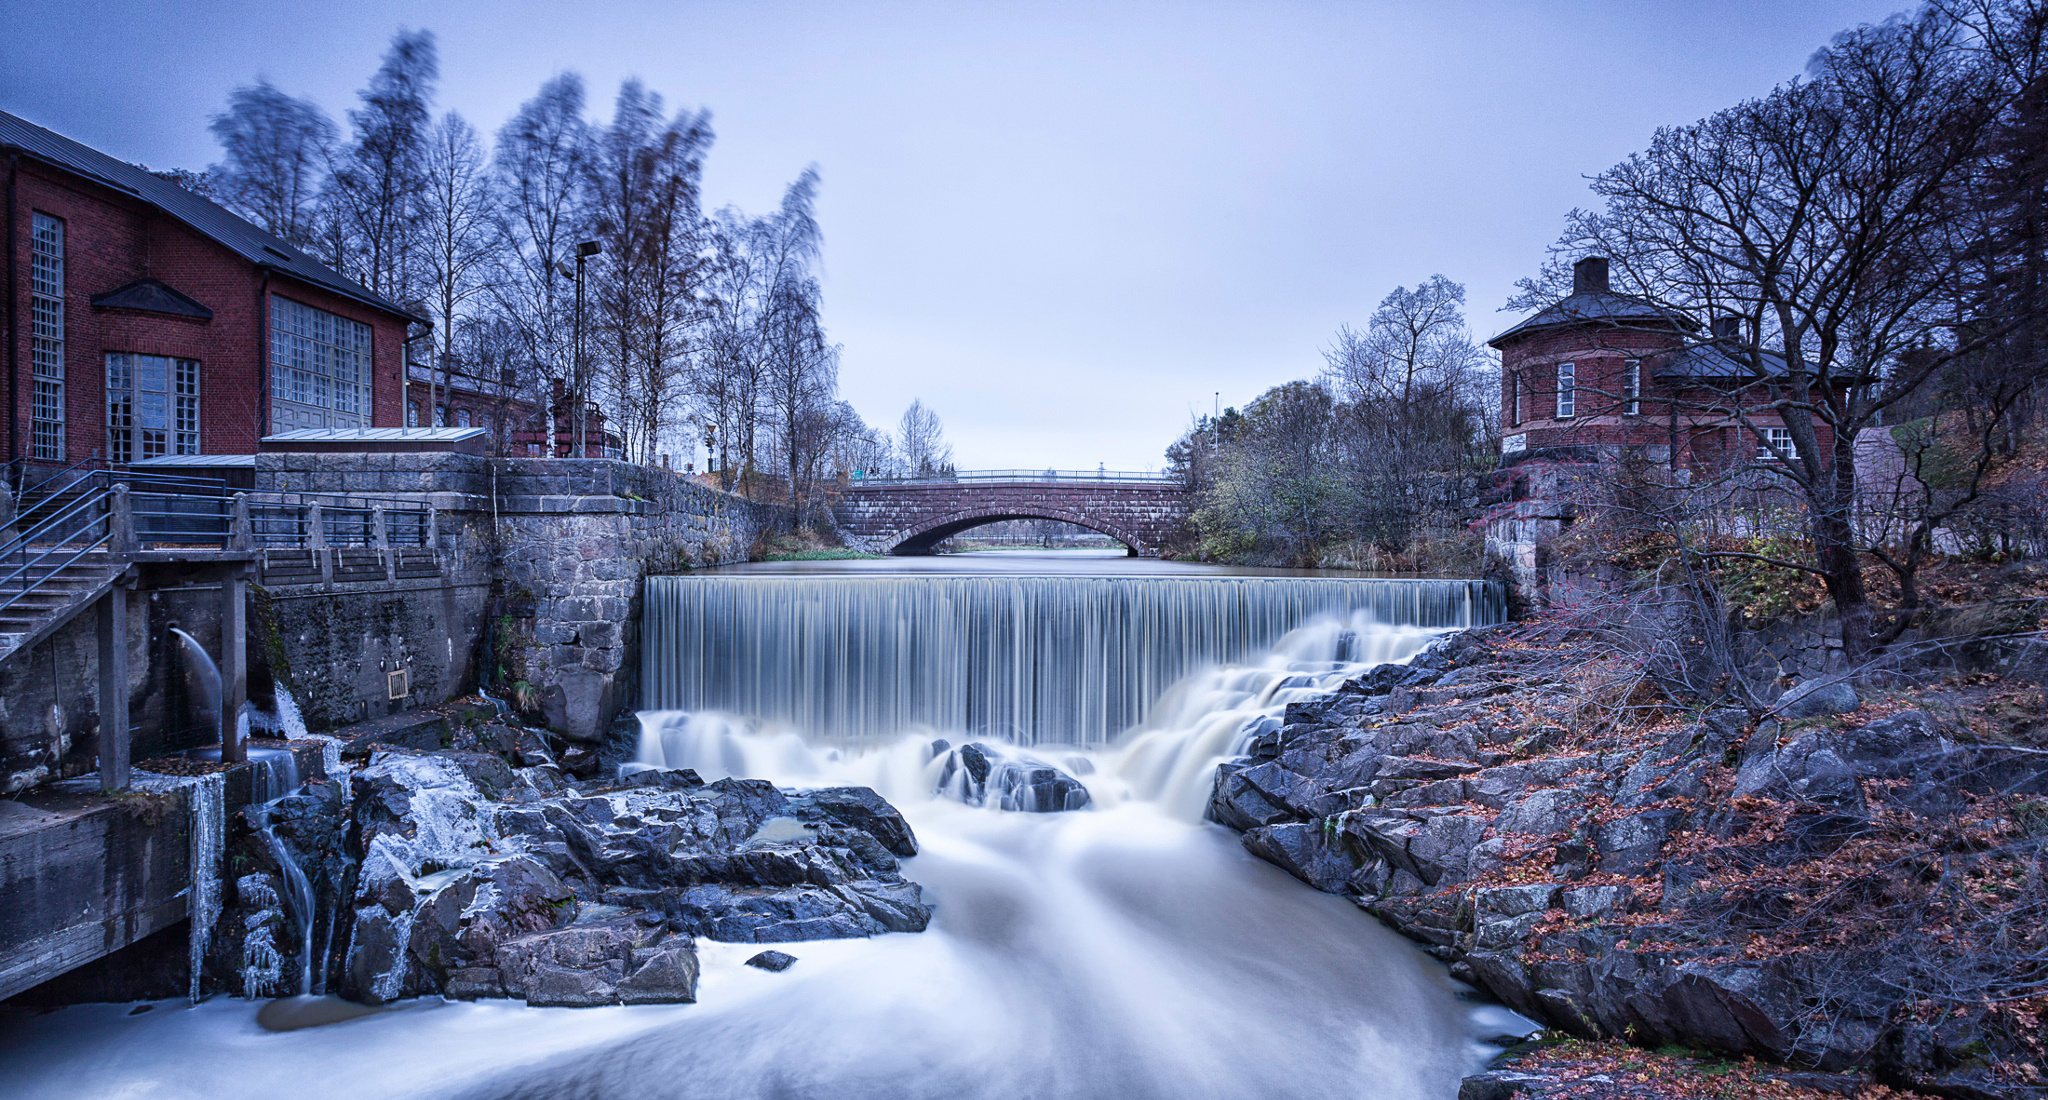 Finland: The old town of Helsinki, Vanhankaupunginlahti, The rapids of the old town. 2050x1100 HD Wallpaper.